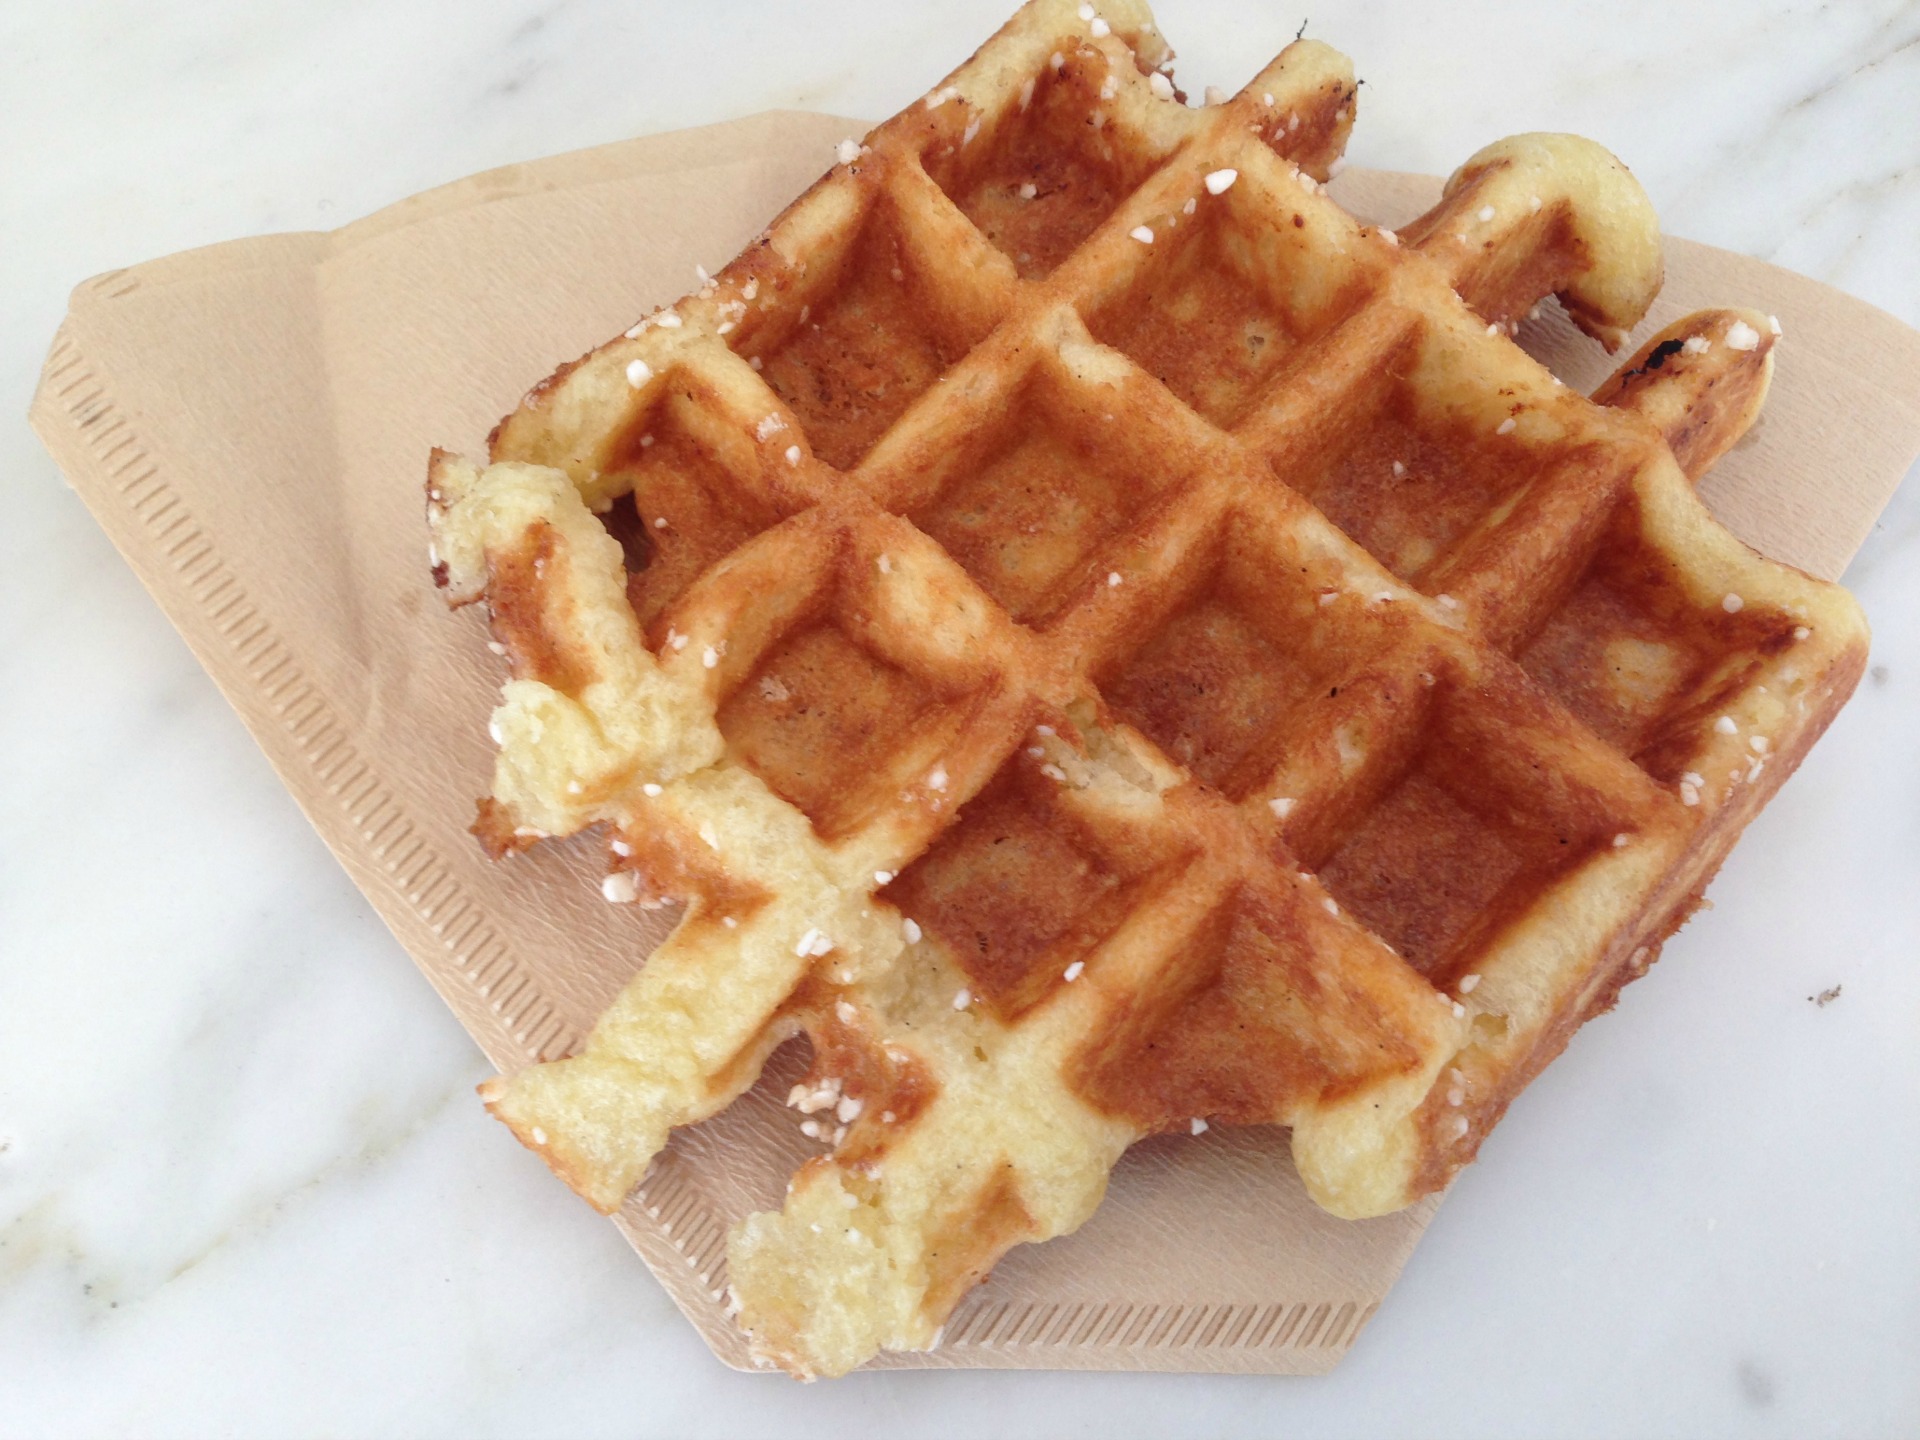 Blue Bottle's liege waffle, served in a coffee filter.